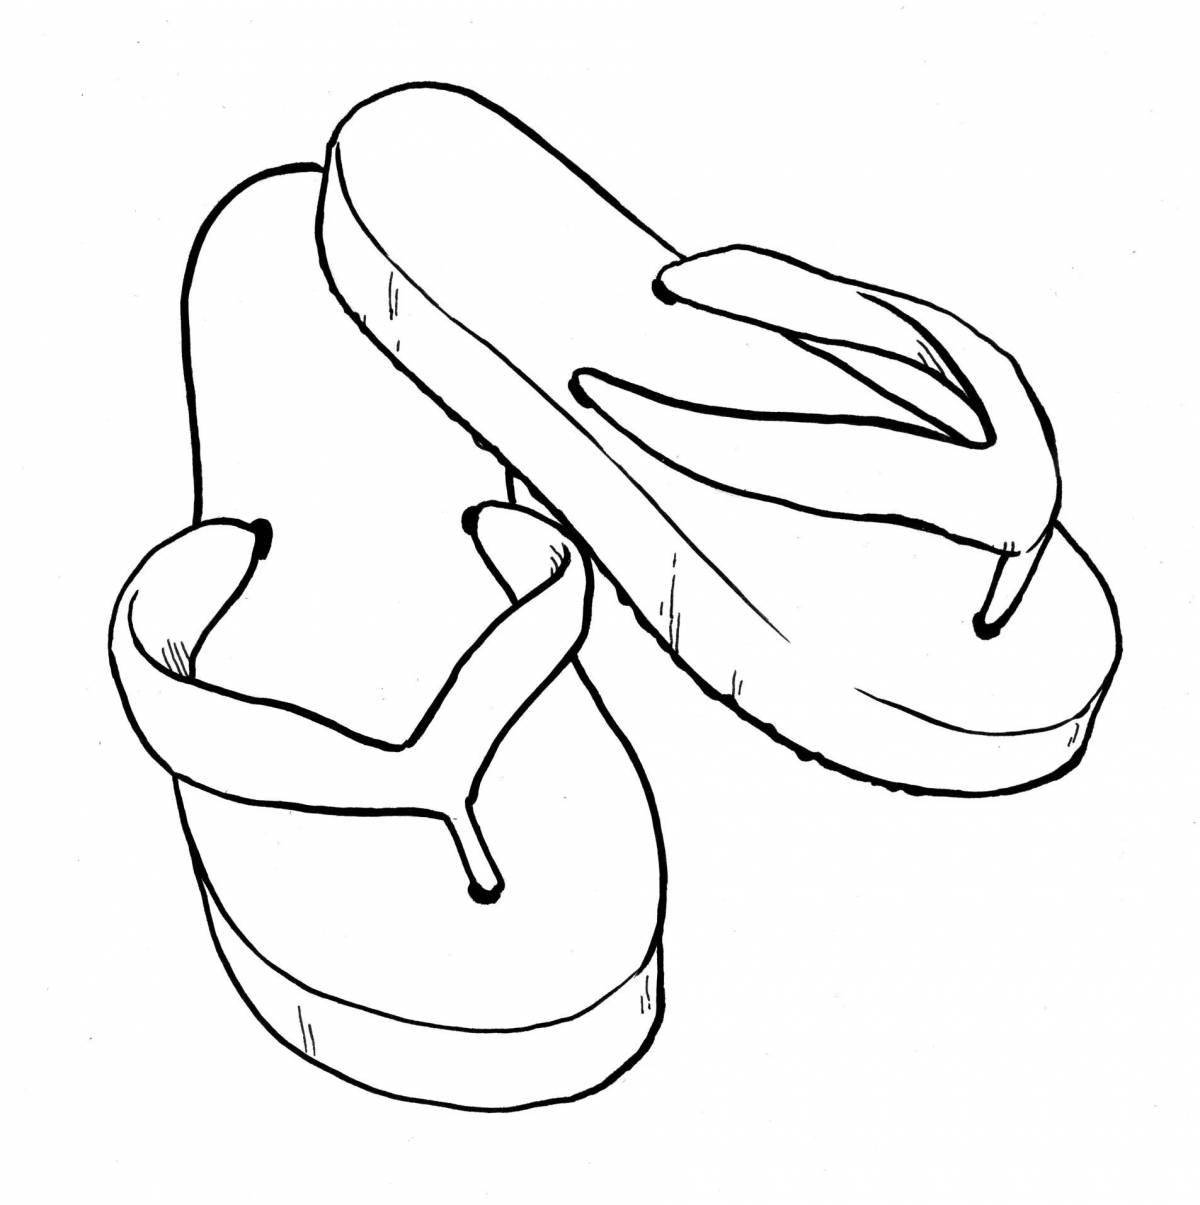 Coloring book colorful shoes for preschoolers